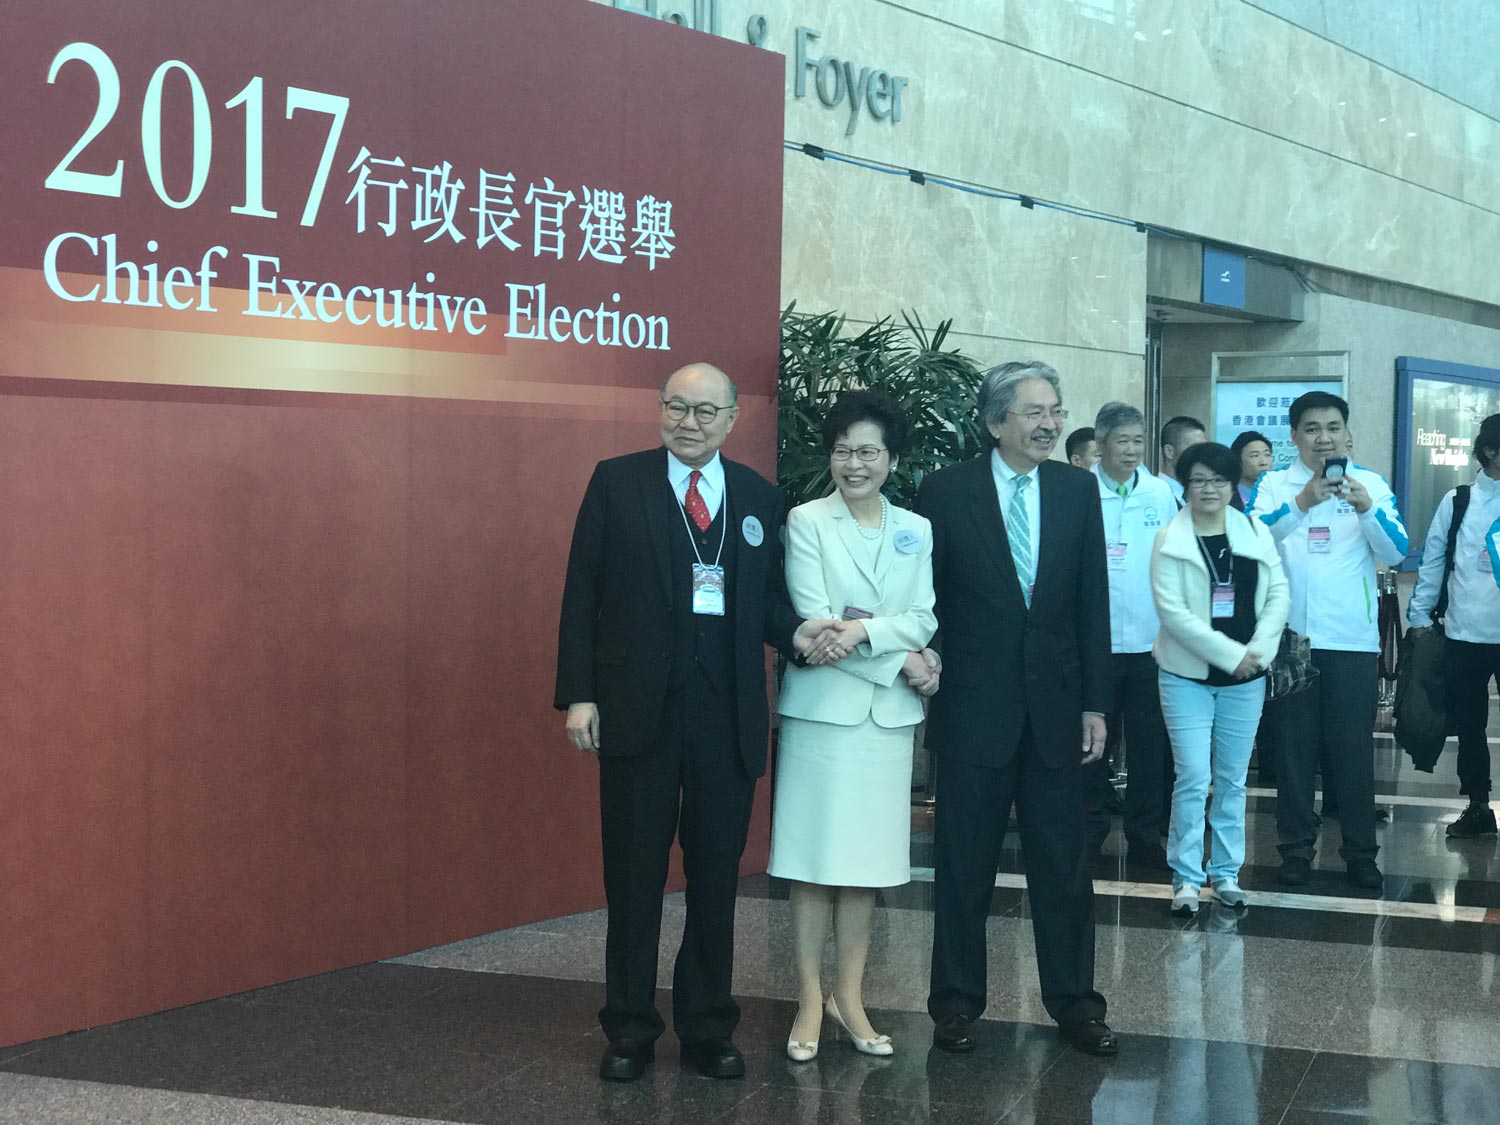 Three qualified candidates running for the top position in Hong Kong.[Photo: CCTV] 